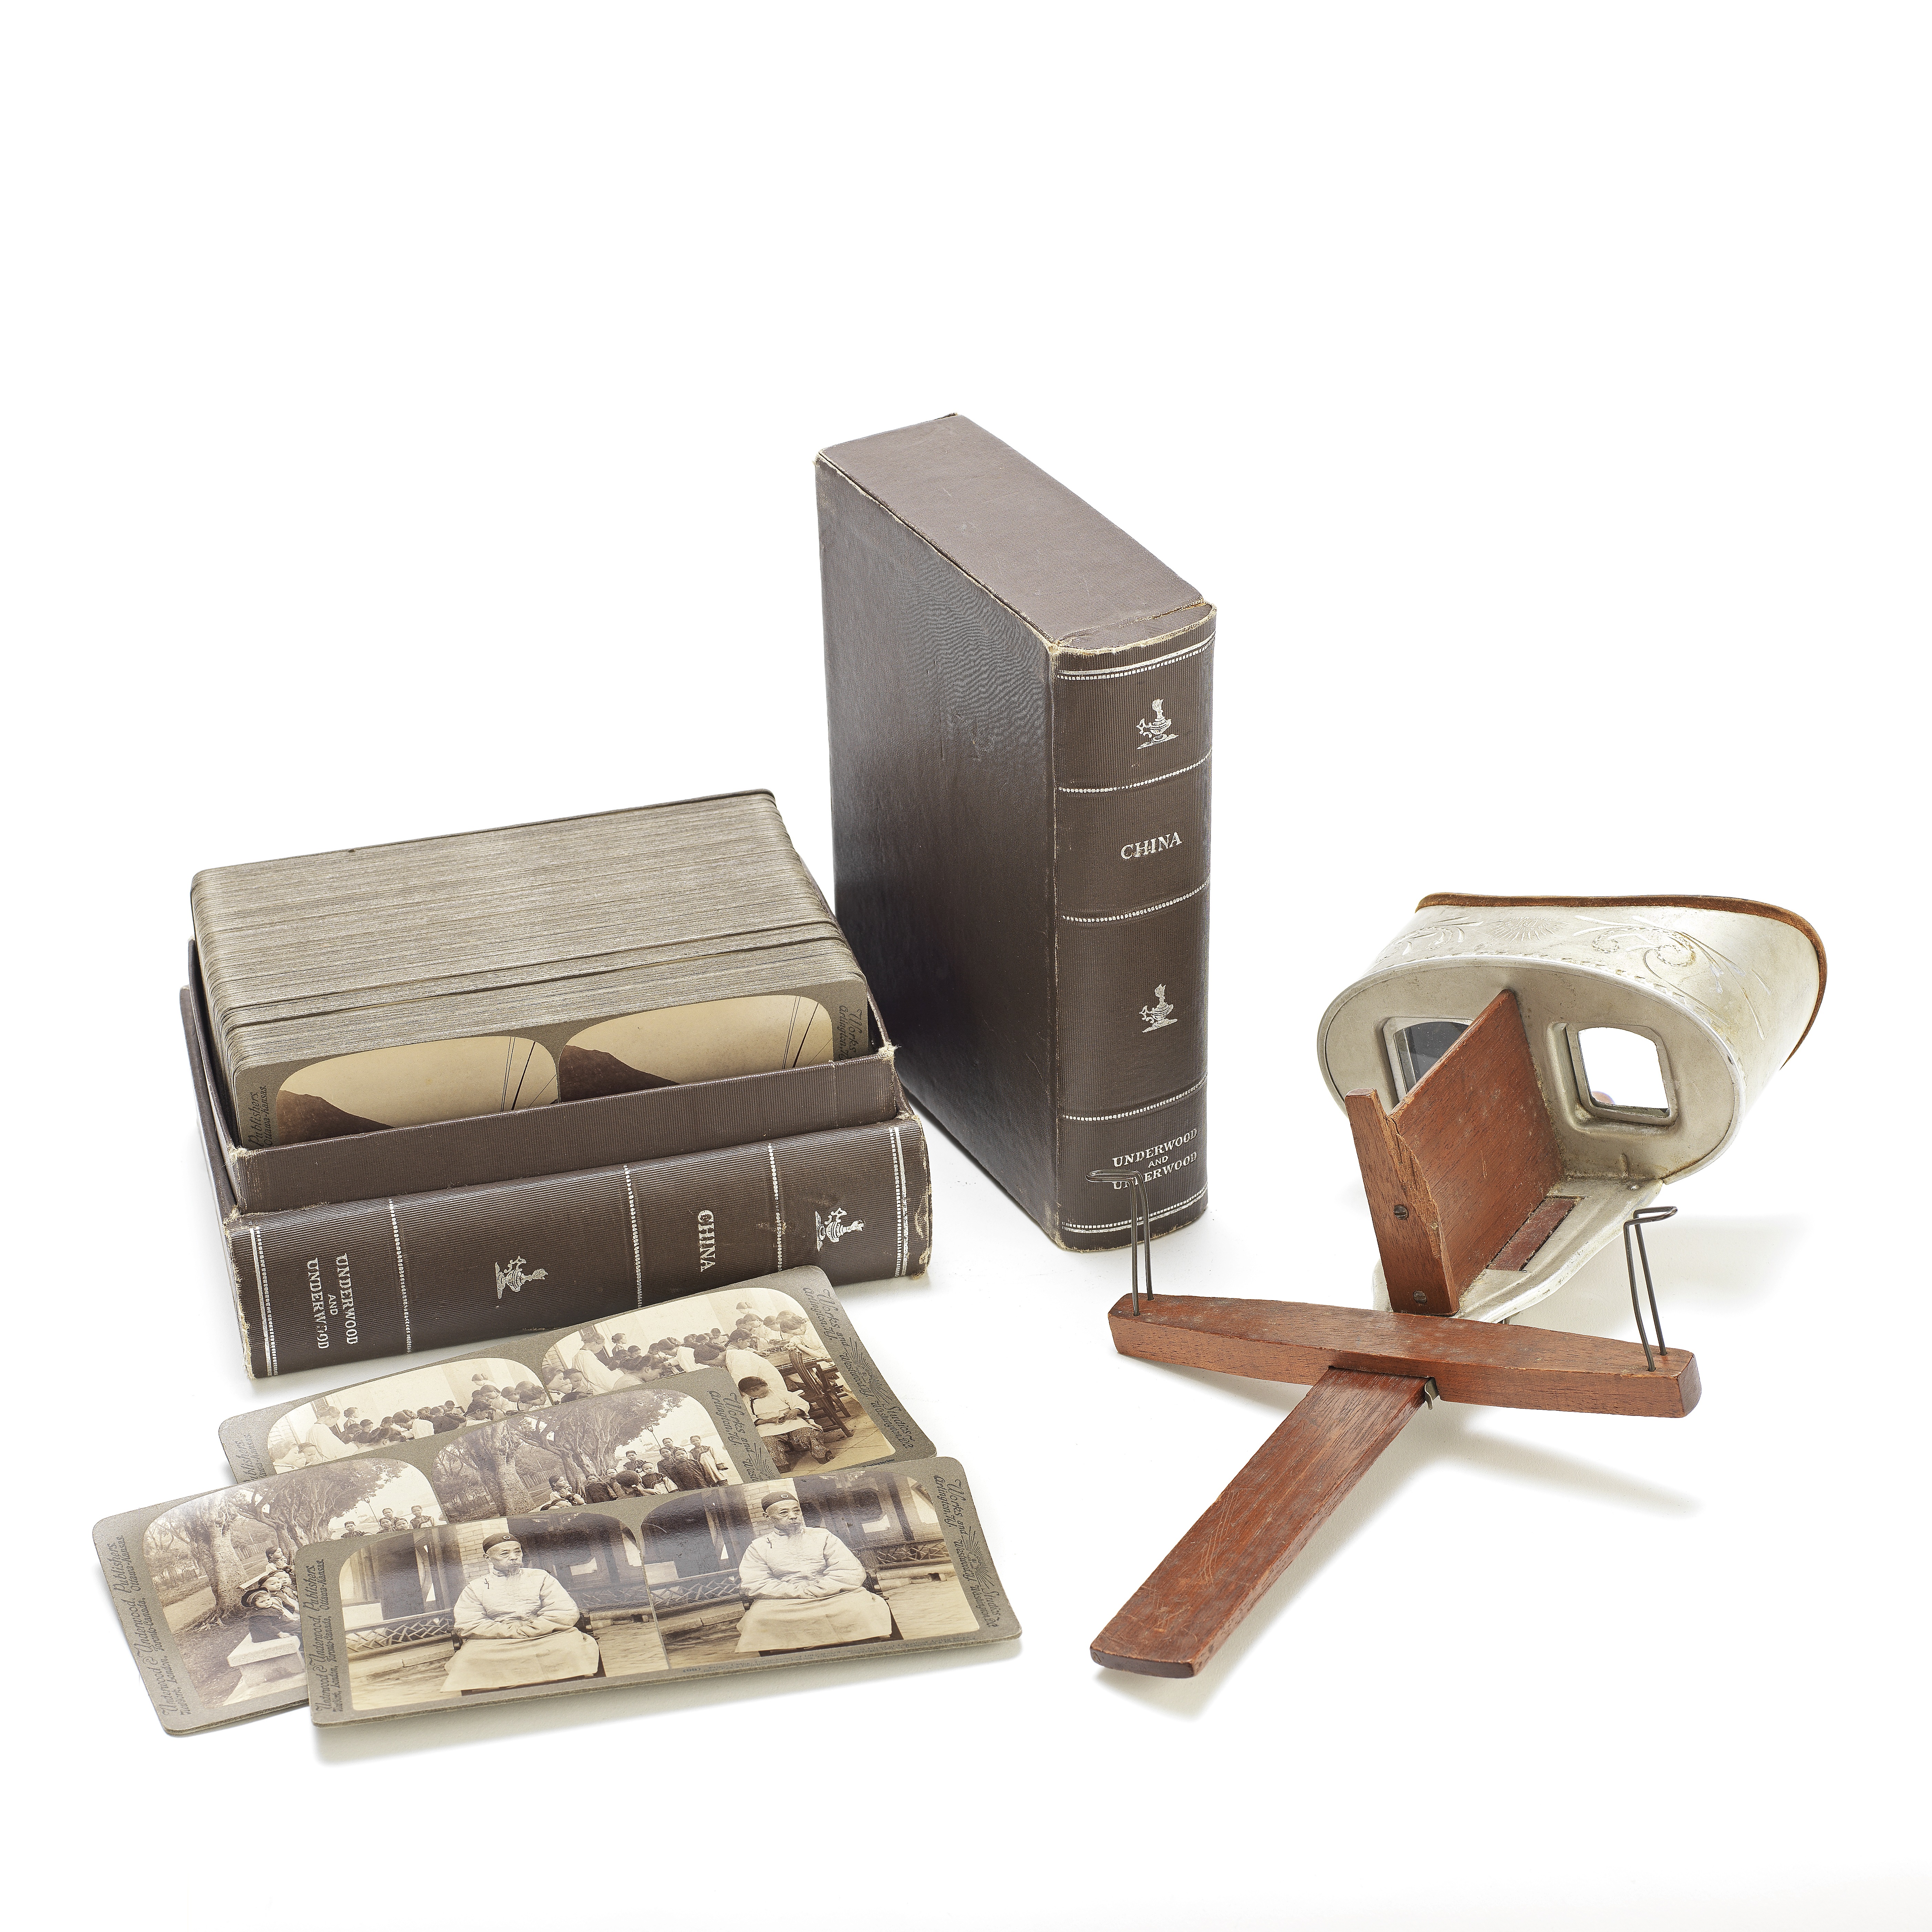 AN UNDERWOOD & UNDERWOOD STEREOSCOPIC VIEWER AND CASED-CARDS WITH PHOTOGRAPHS OF CHINA Circa 1901...